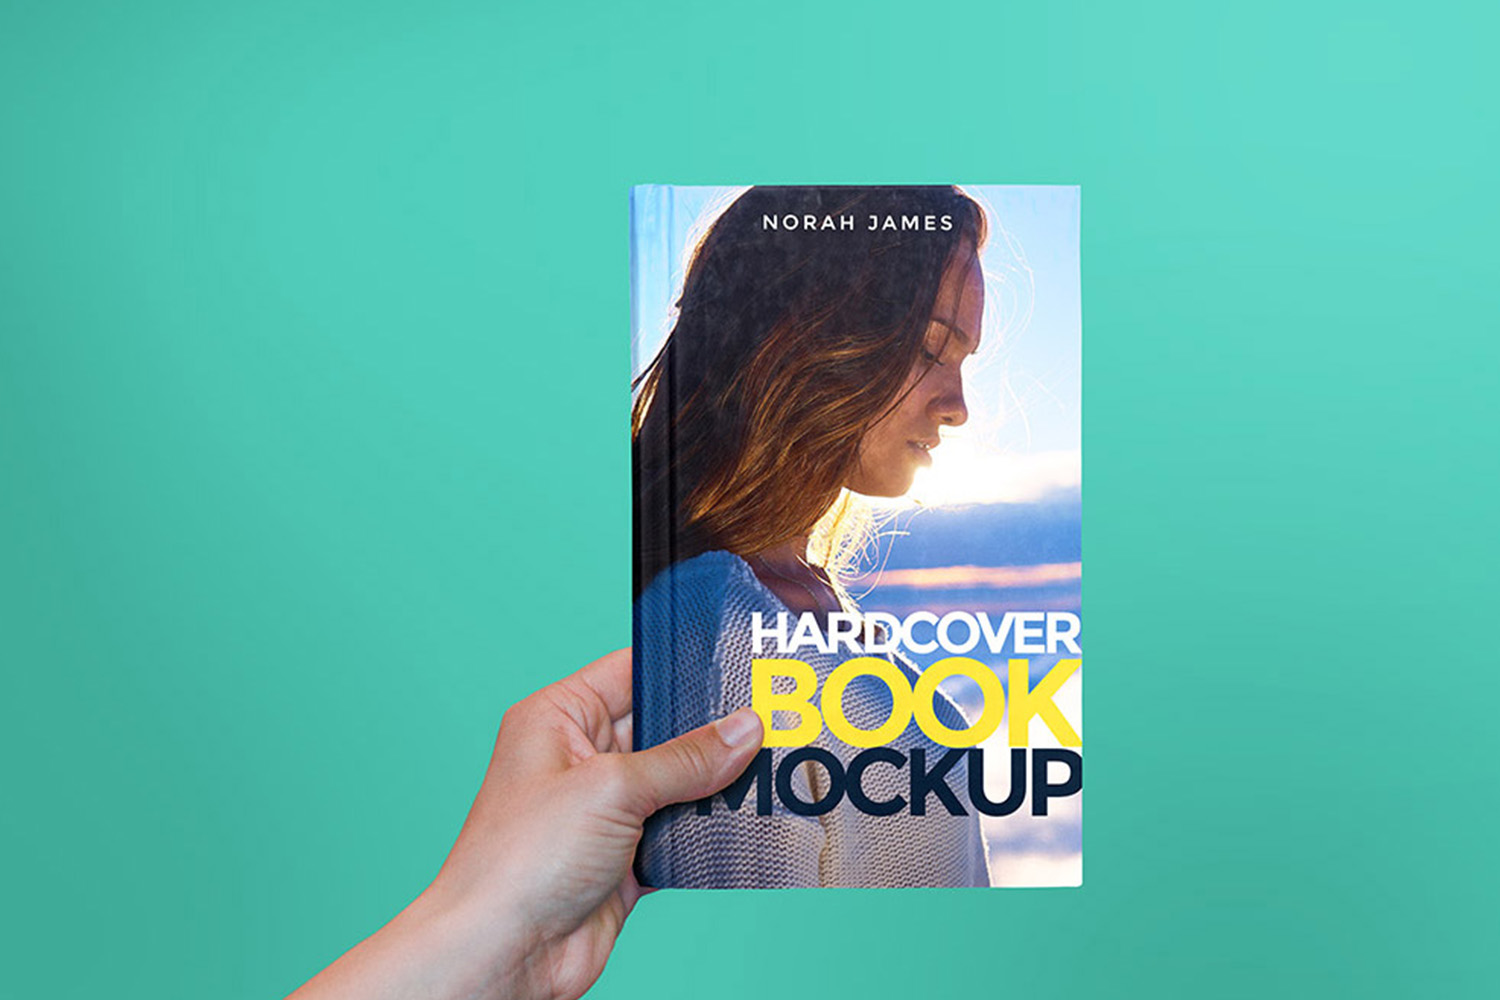 Hardcover Book in Hand Mockup Free Download